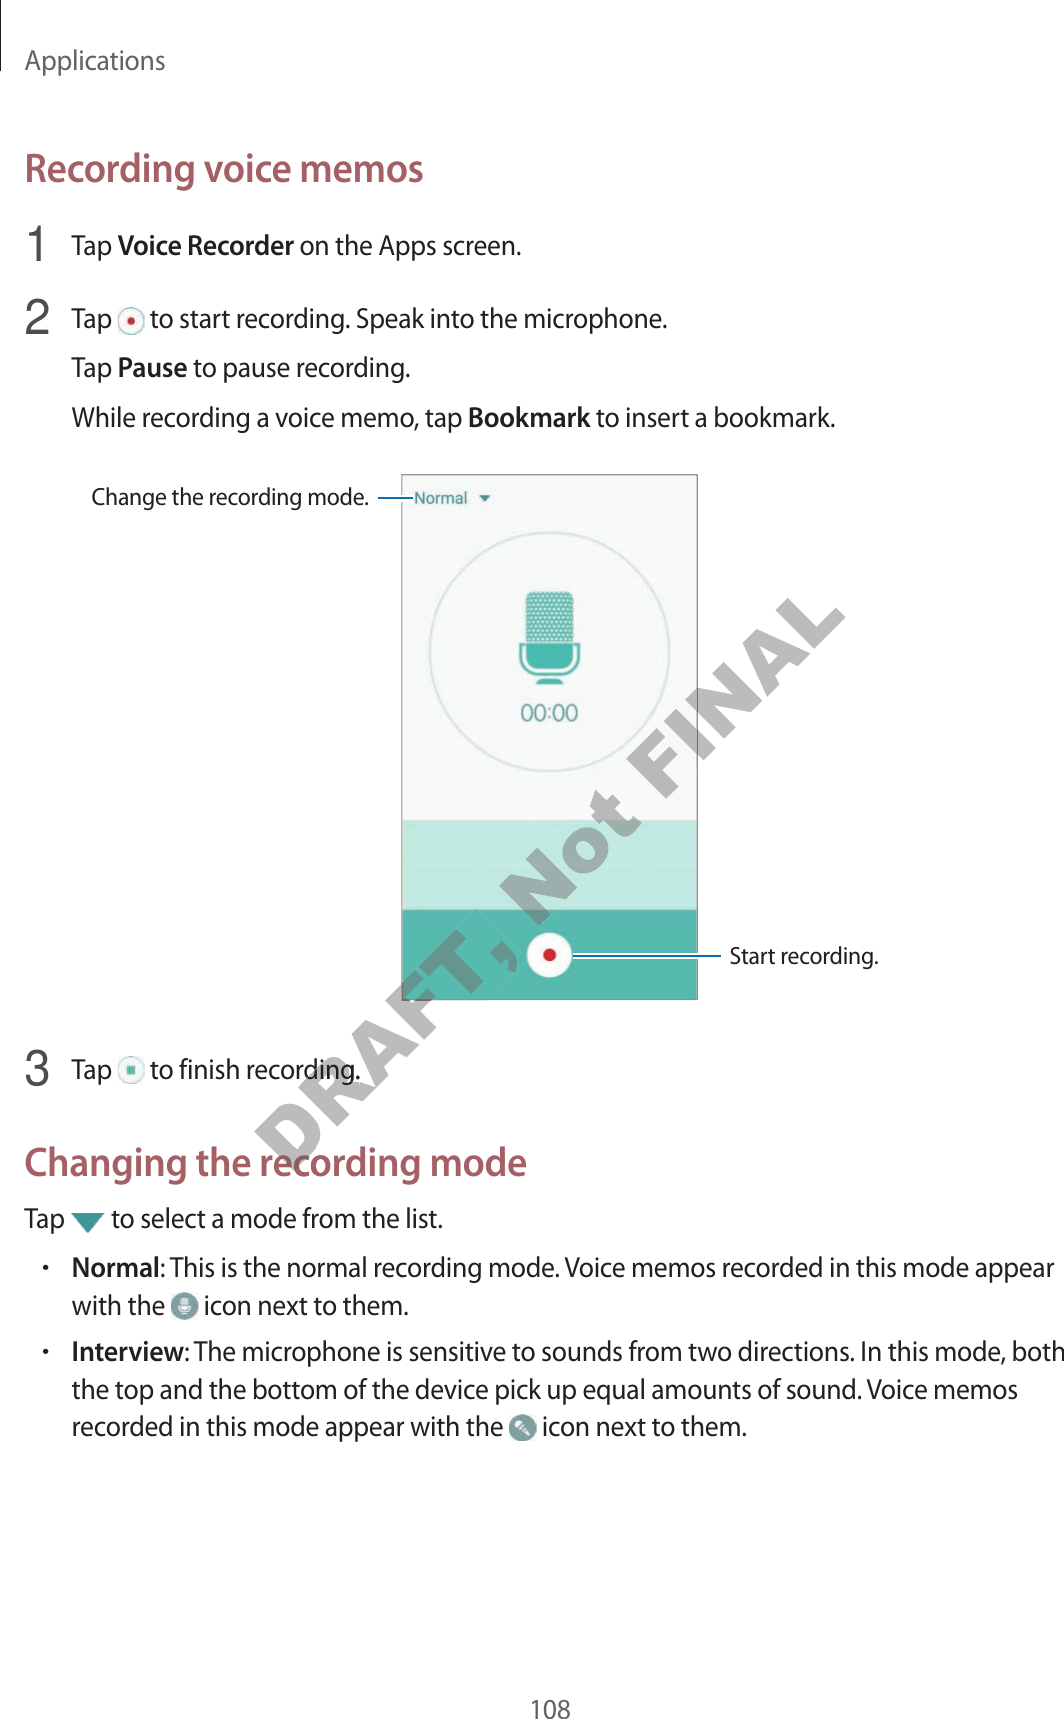 Applications108Recor ding v oic e memos1 Tap Voice Recor der on the Apps screen.2 Tap   to start recor ding . Speak in to the micr ophone .Tap Pause to pause rec or ding .While rec or ding a v oice memo, tap Bookmark to insert a bookmark.Change the recor ding mode .Start rec or ding .3 Tap   to finish recor ding .Changing the r ec or ding modeTap   to select a mode from the list.•Normal: This is the normal rec or ding mode . Voice memos r ecor ded in this mode appear with the   icon next to them.•Interview: The micr ophone is sensitiv e to sounds fr om two dir ections. In this mode, both the top and the bottom of the devic e pick up equal amounts of sound . Voice memos recor ded in this mode appear with the   icon next to them.DRAFT, DRAFT, DRAFT,  to finish rec or ding .DRAFT,  to finish rec or ding .Changing the r ec or ding modeDRAFT, Changing the r ec or ding modeNot FINALFINALFINAL